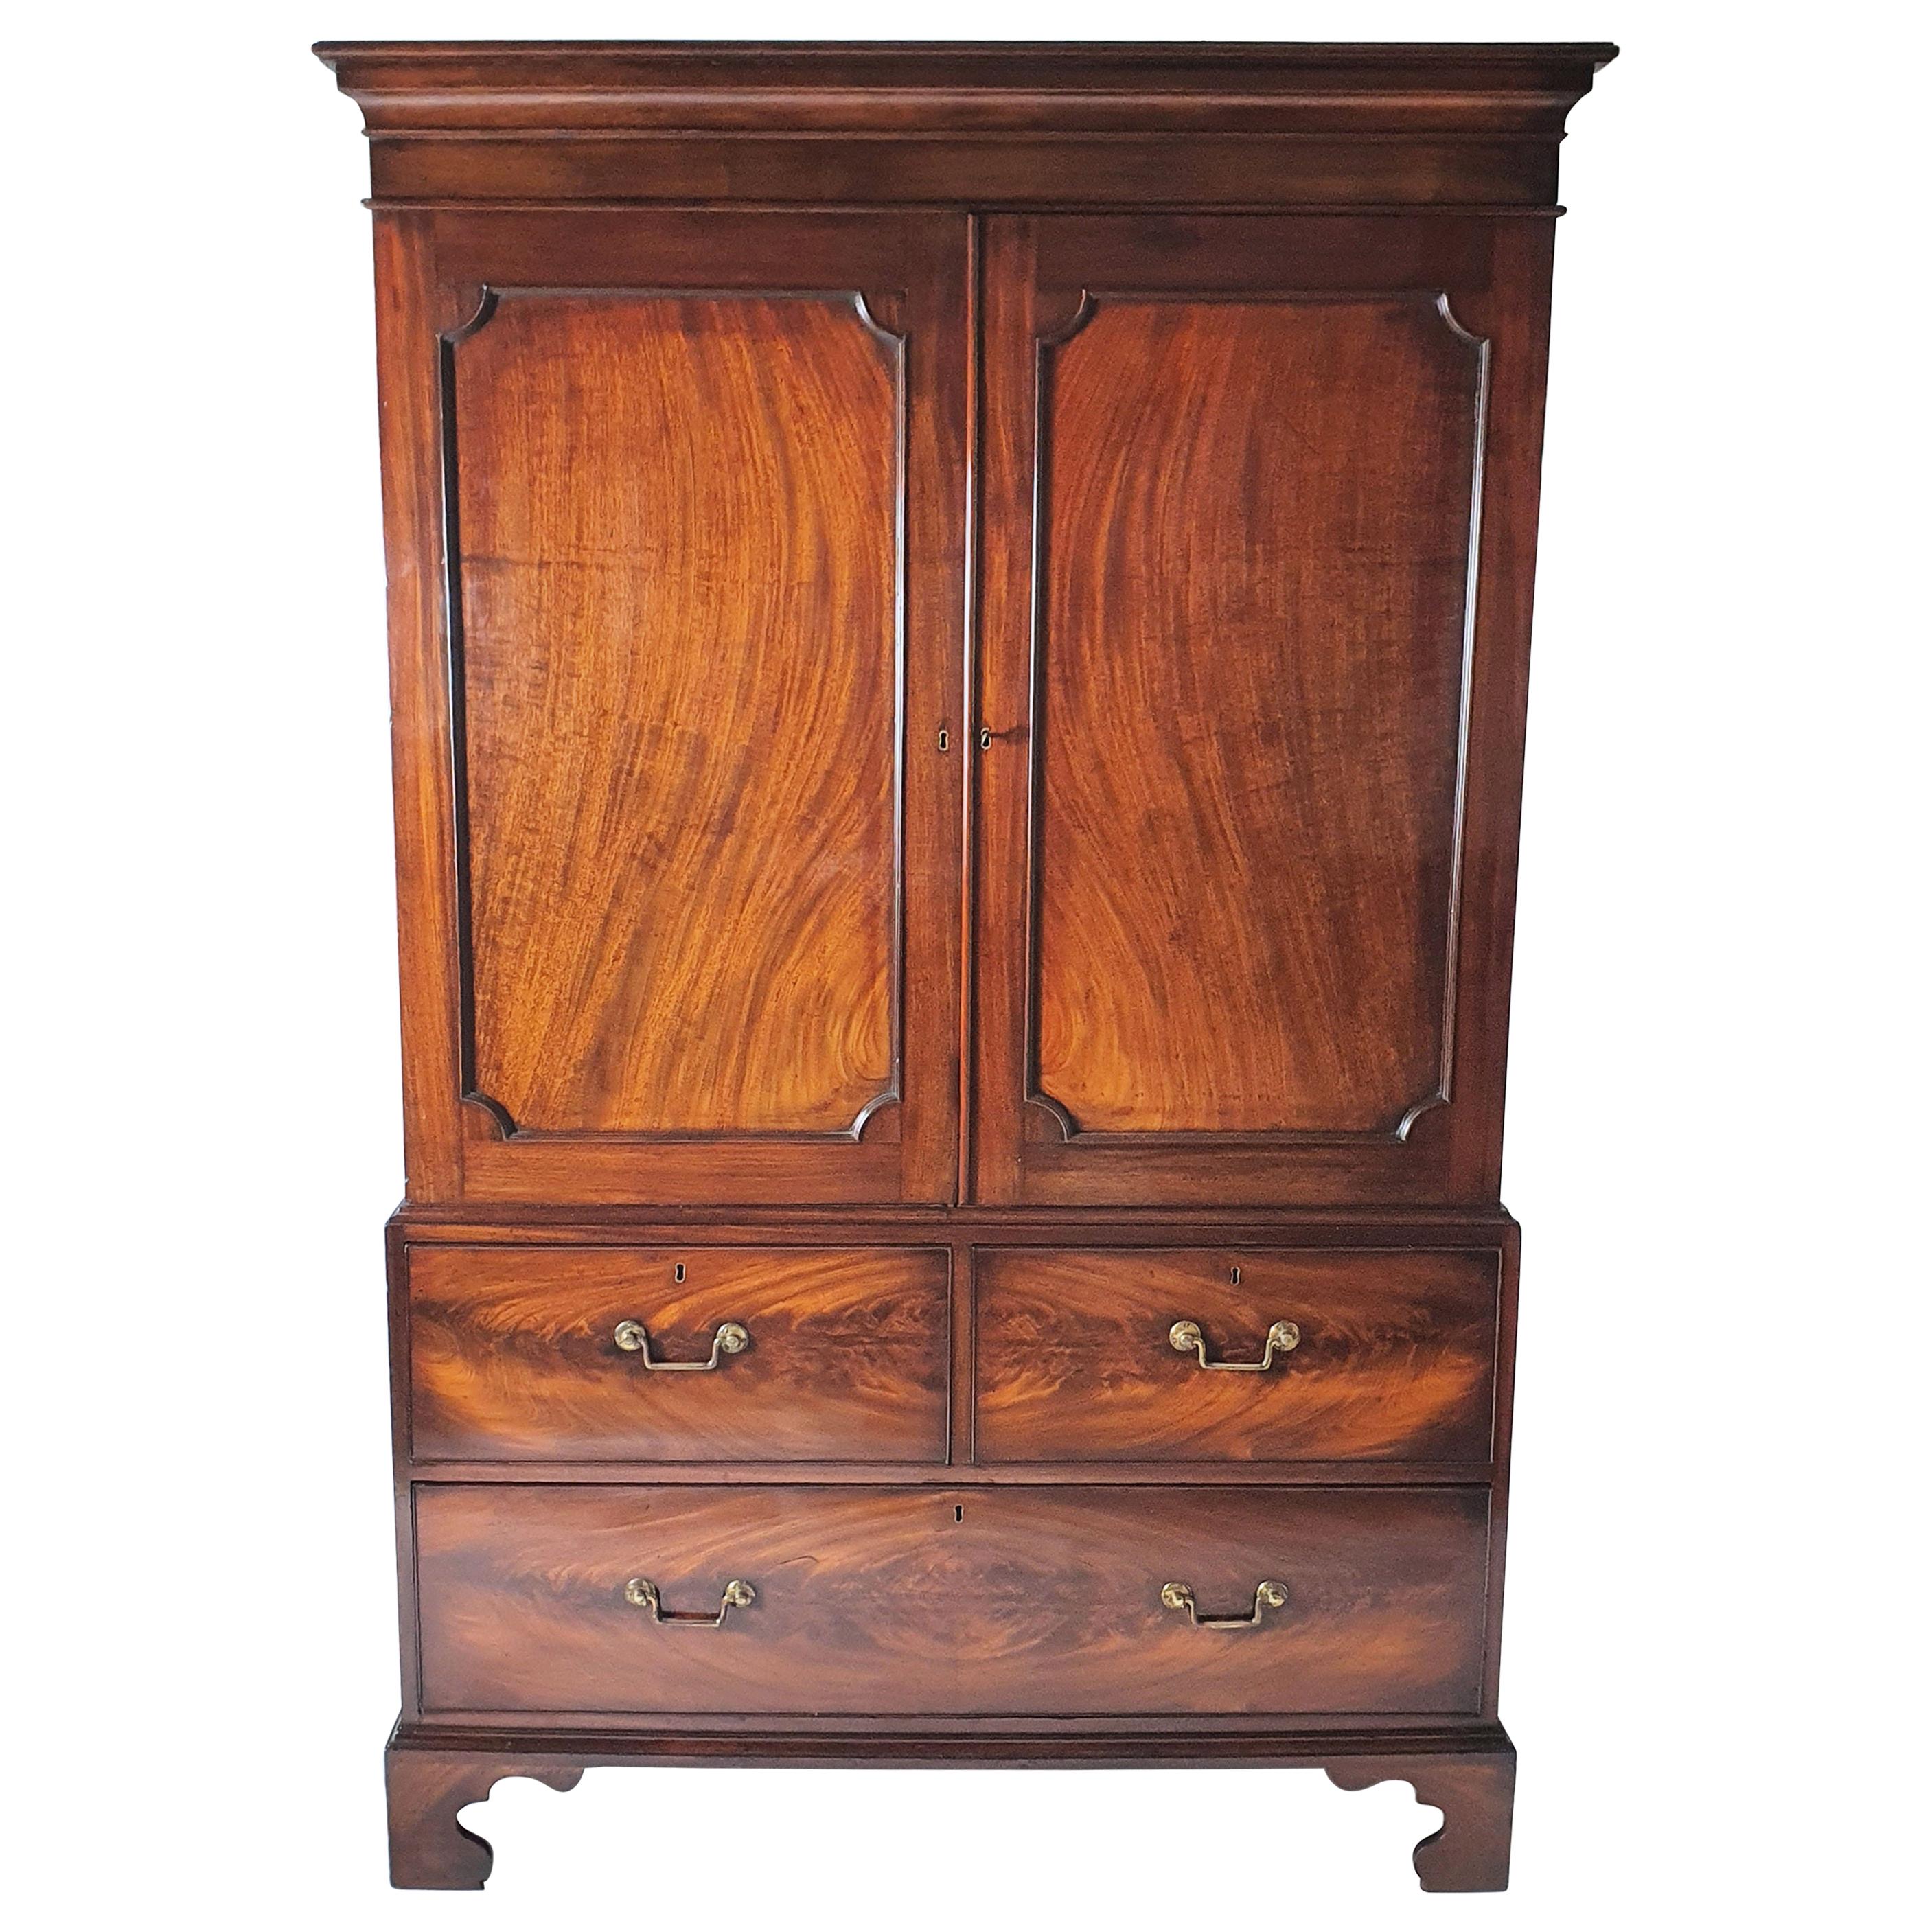 Late 18th Century English Flame Mahogany Linen Press For Sale